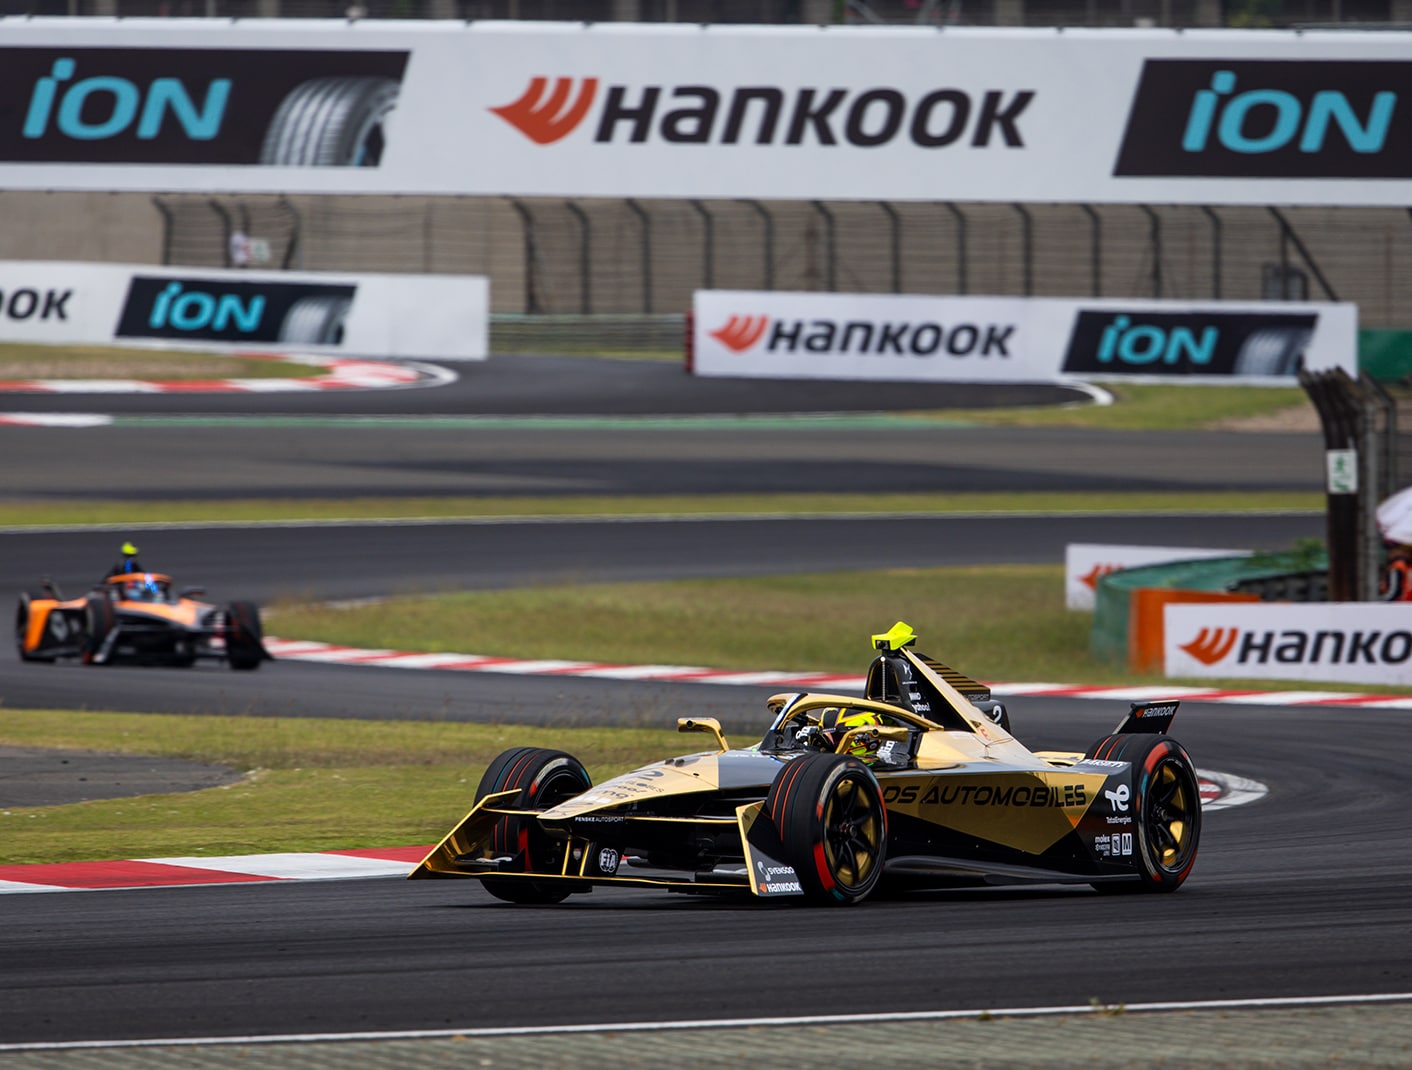 The right tactics result in victory: Evans and da Costa win in Shanghai